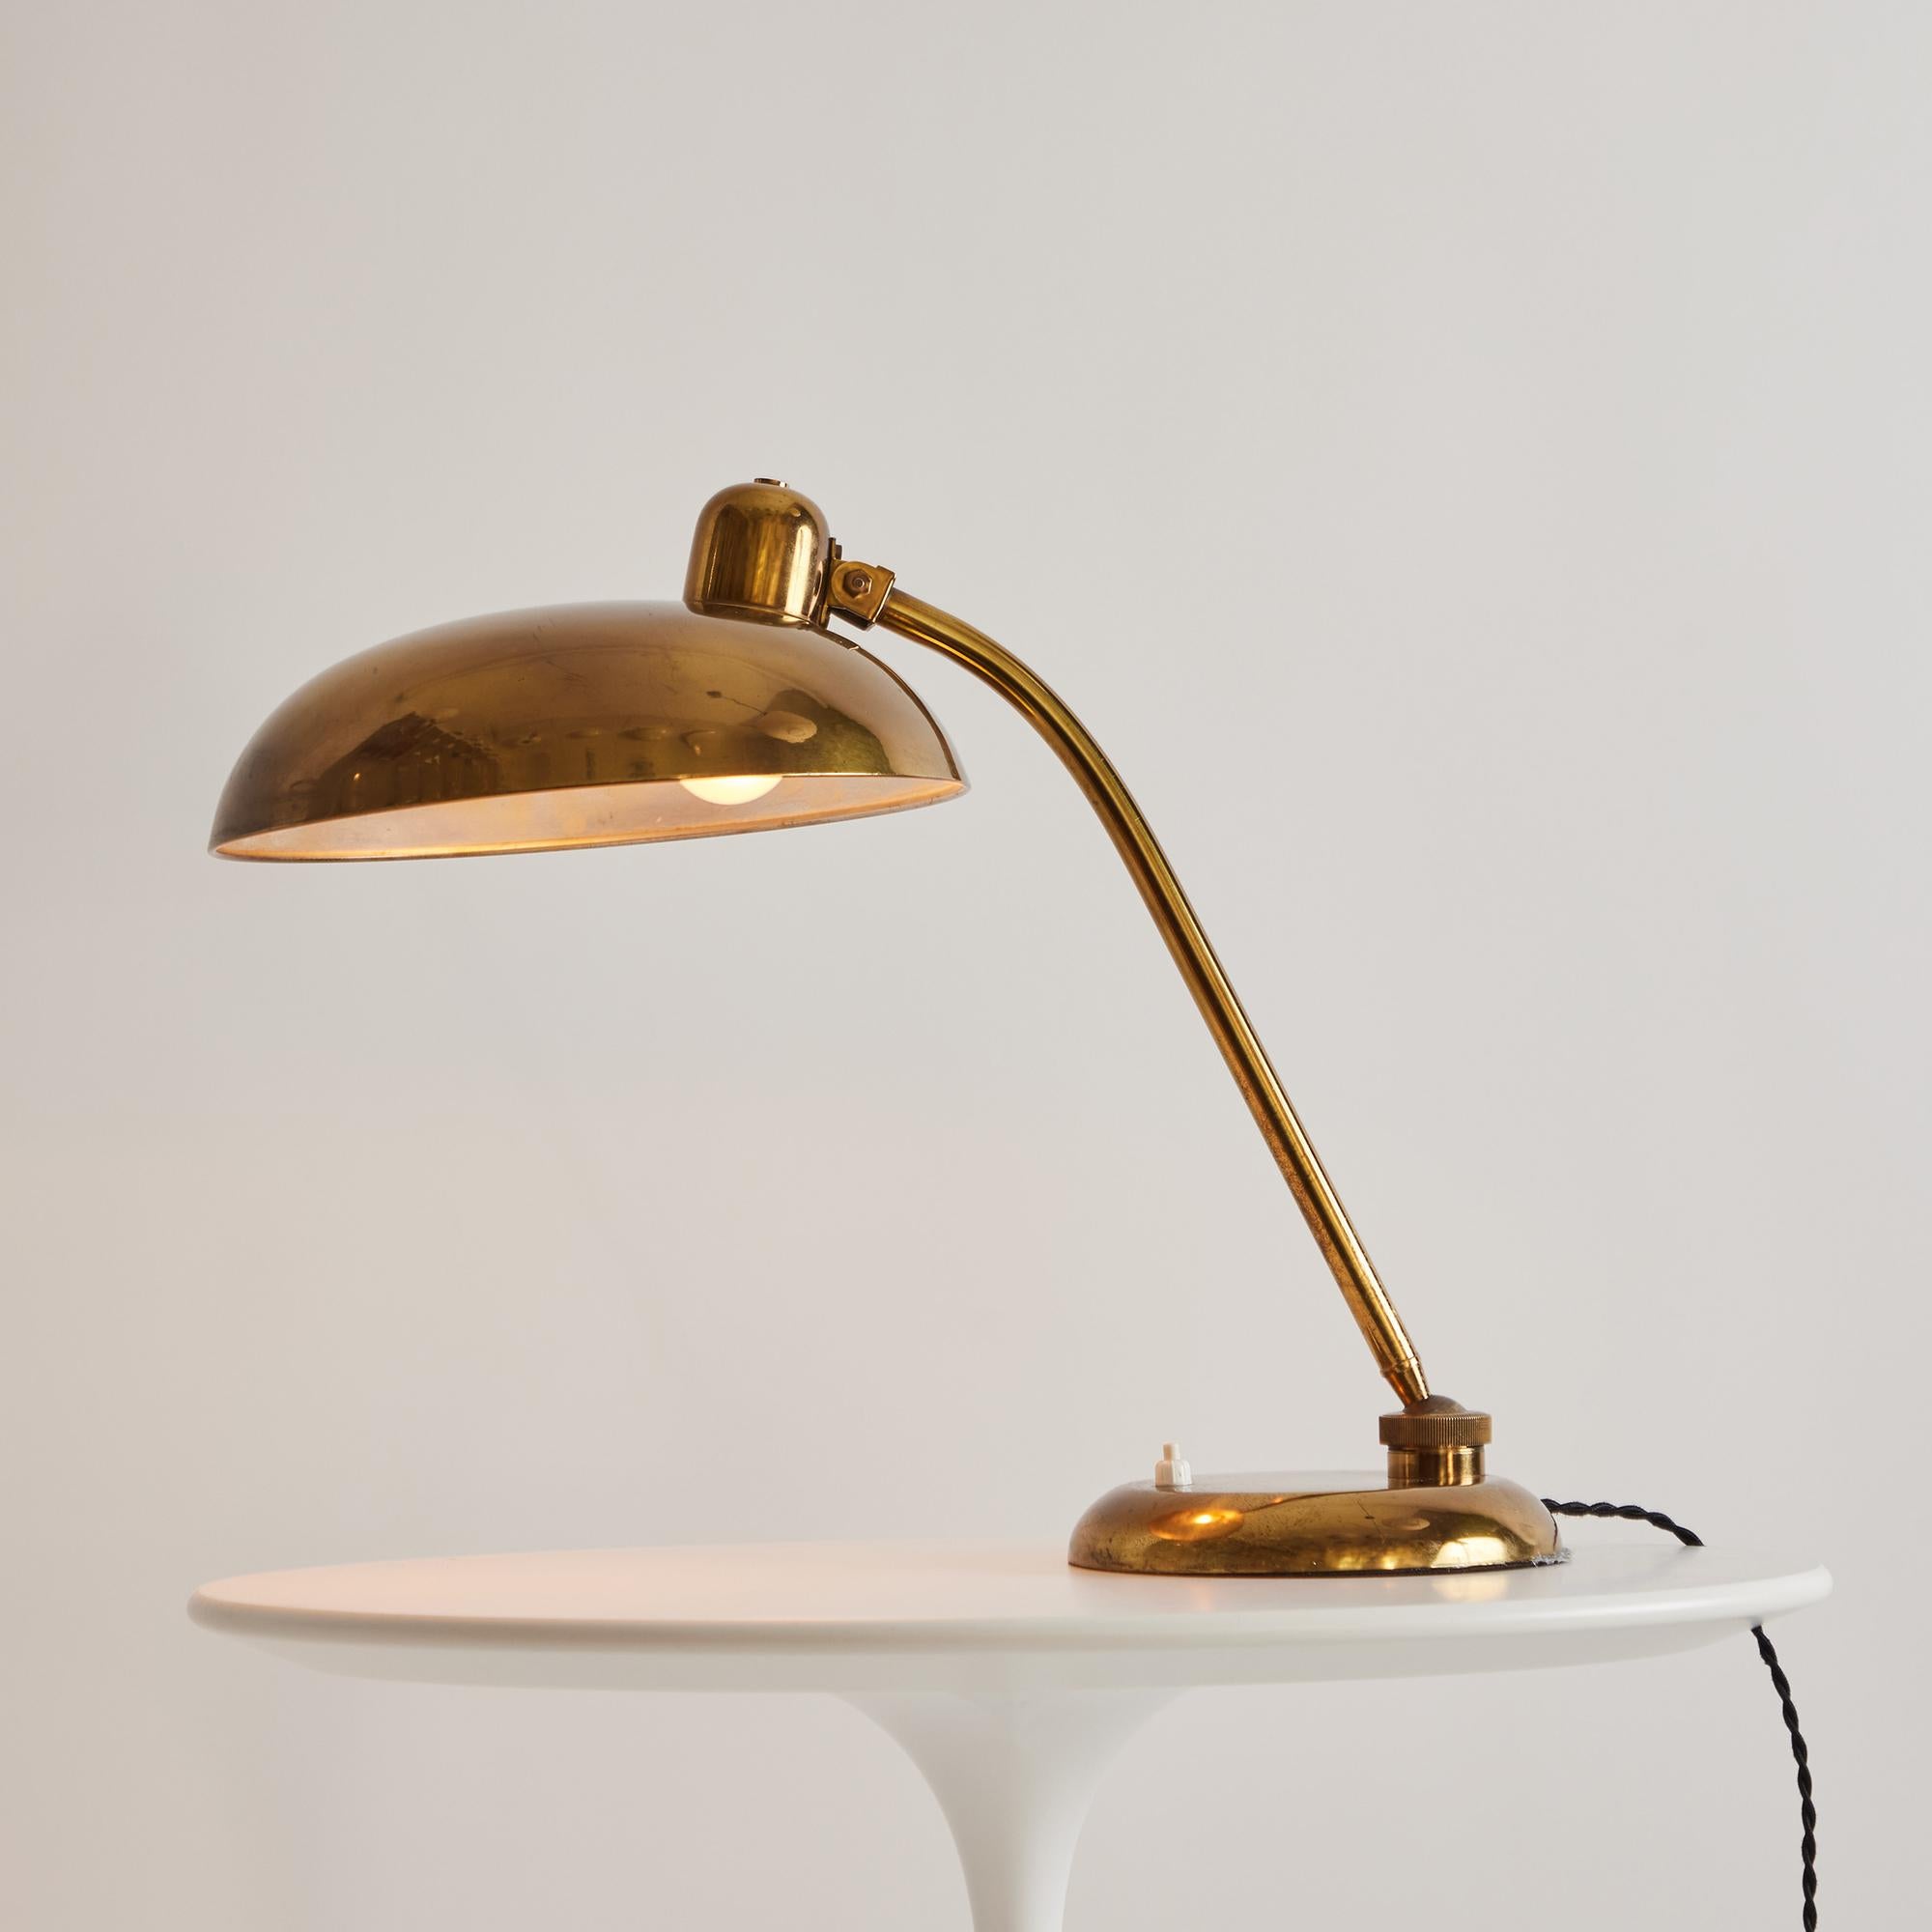 1940s Giovanni Michelucci Patinated Brass Ministerial Table Lamp for Lariolux For Sale 4